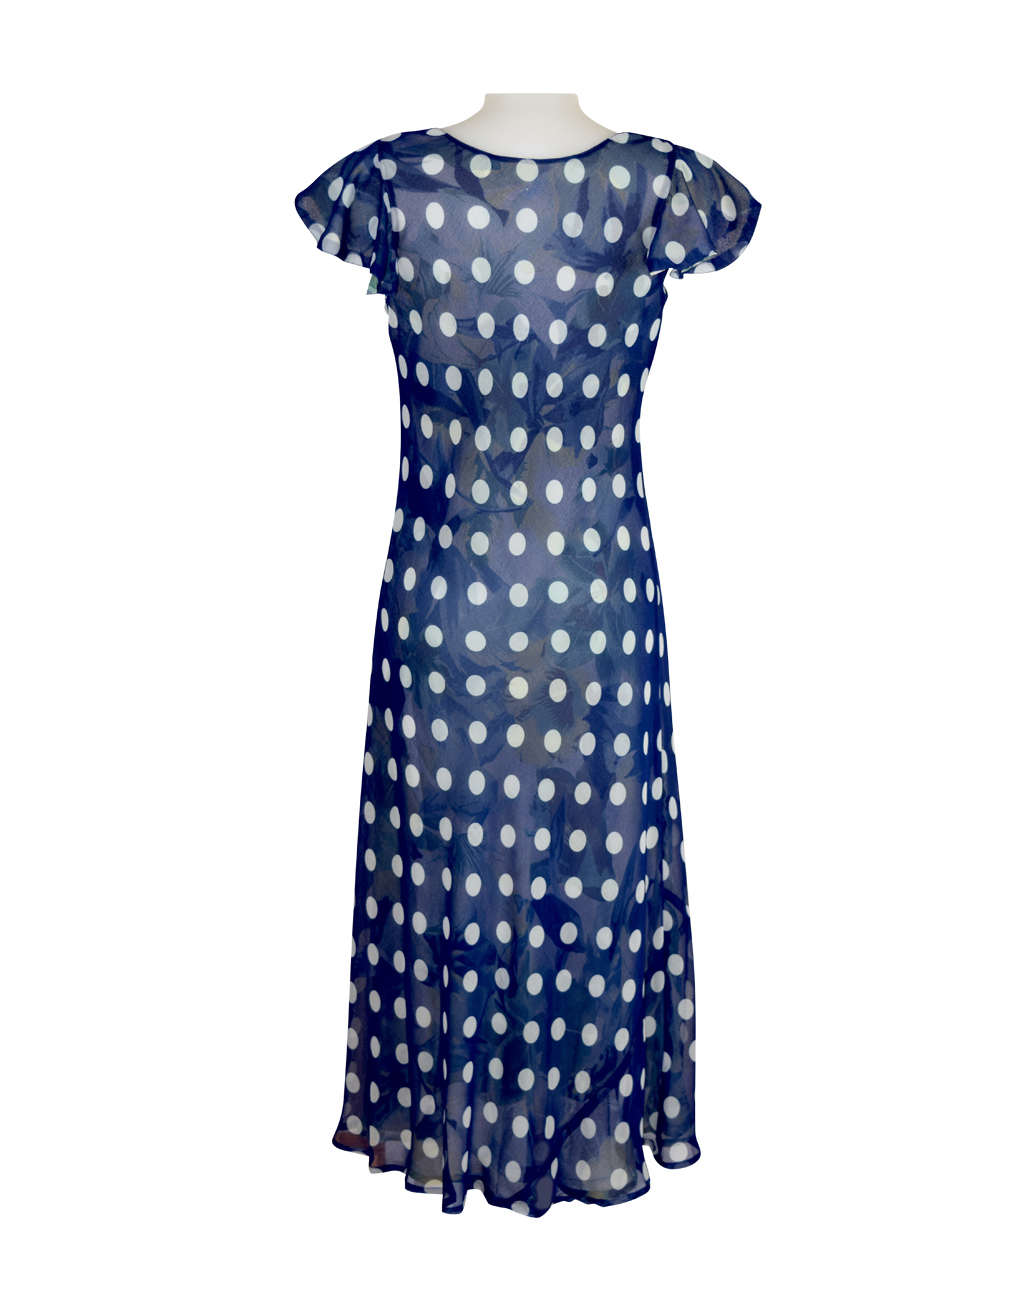 0791 Paramour Reversible 2 In 1 Capped Sleeve Dress Navy & White Polka Dot / Floral C